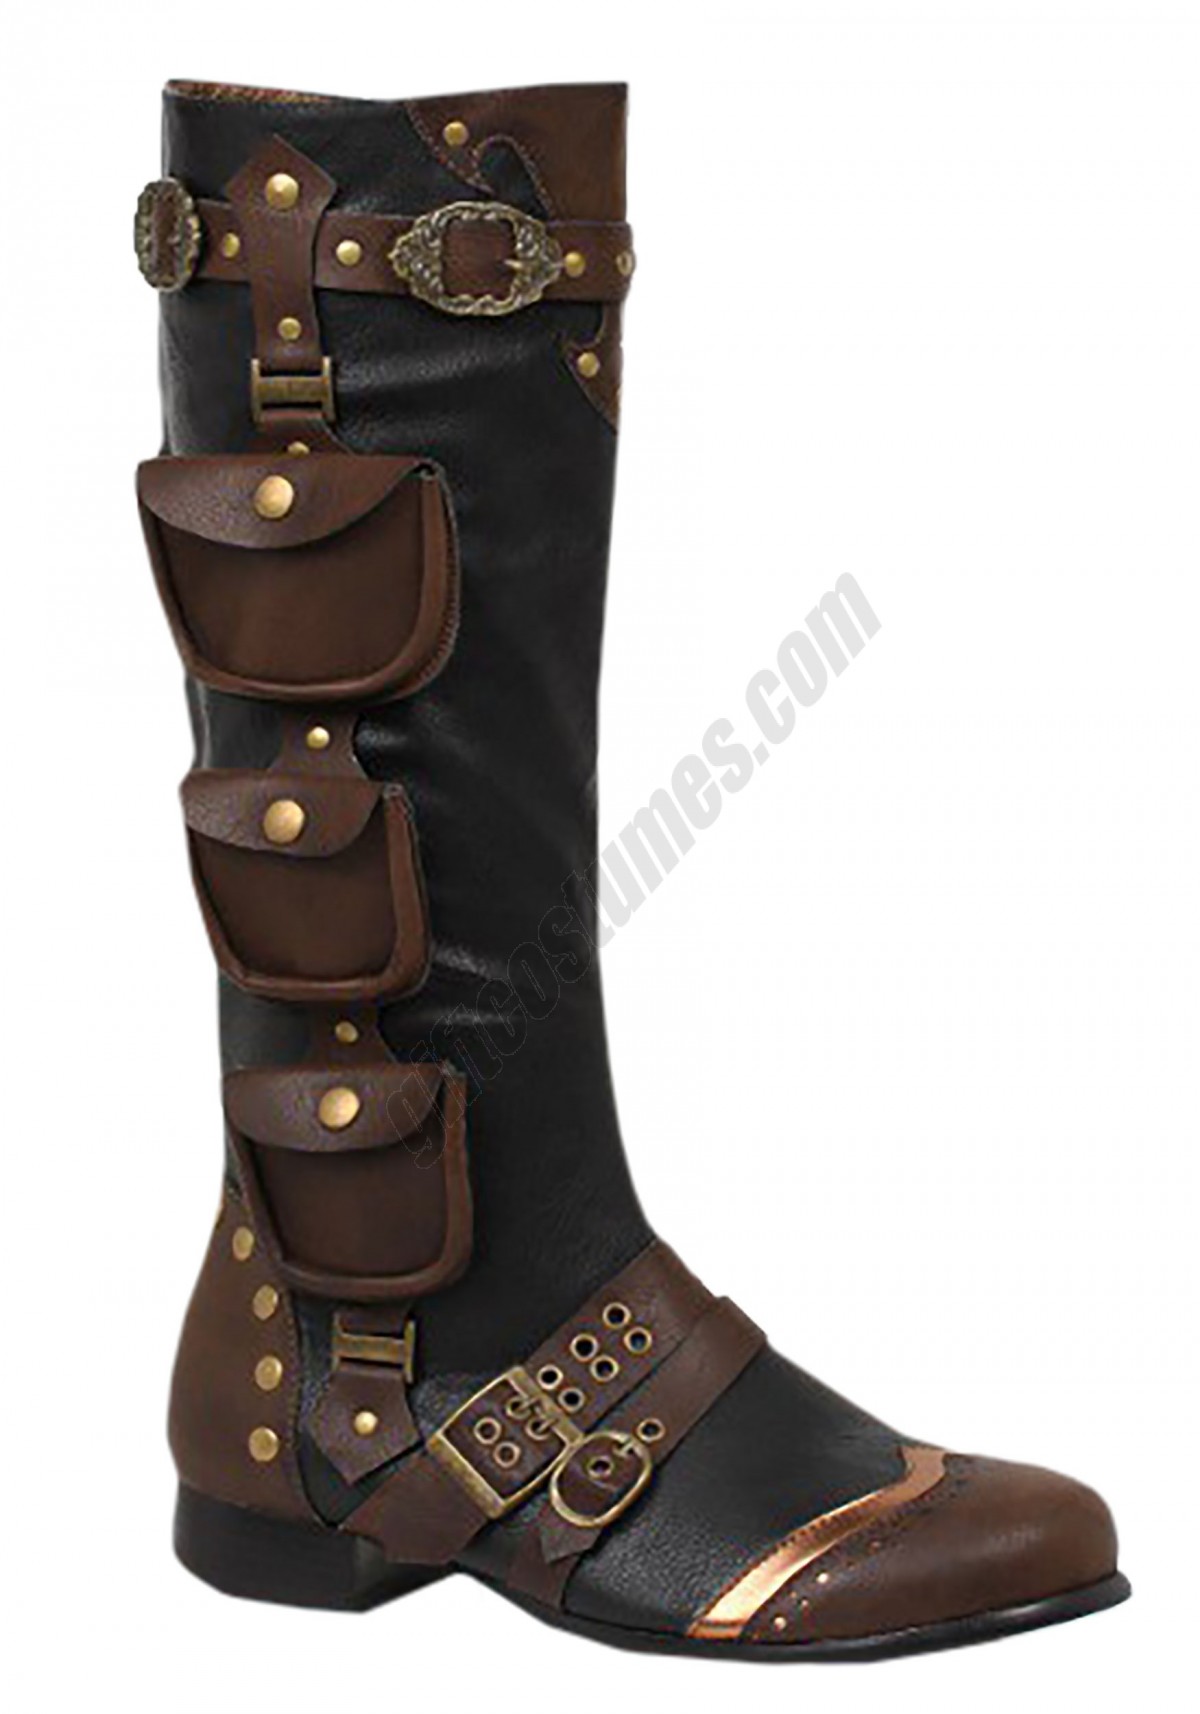 Men's Steampunk Boots Promotions - -0